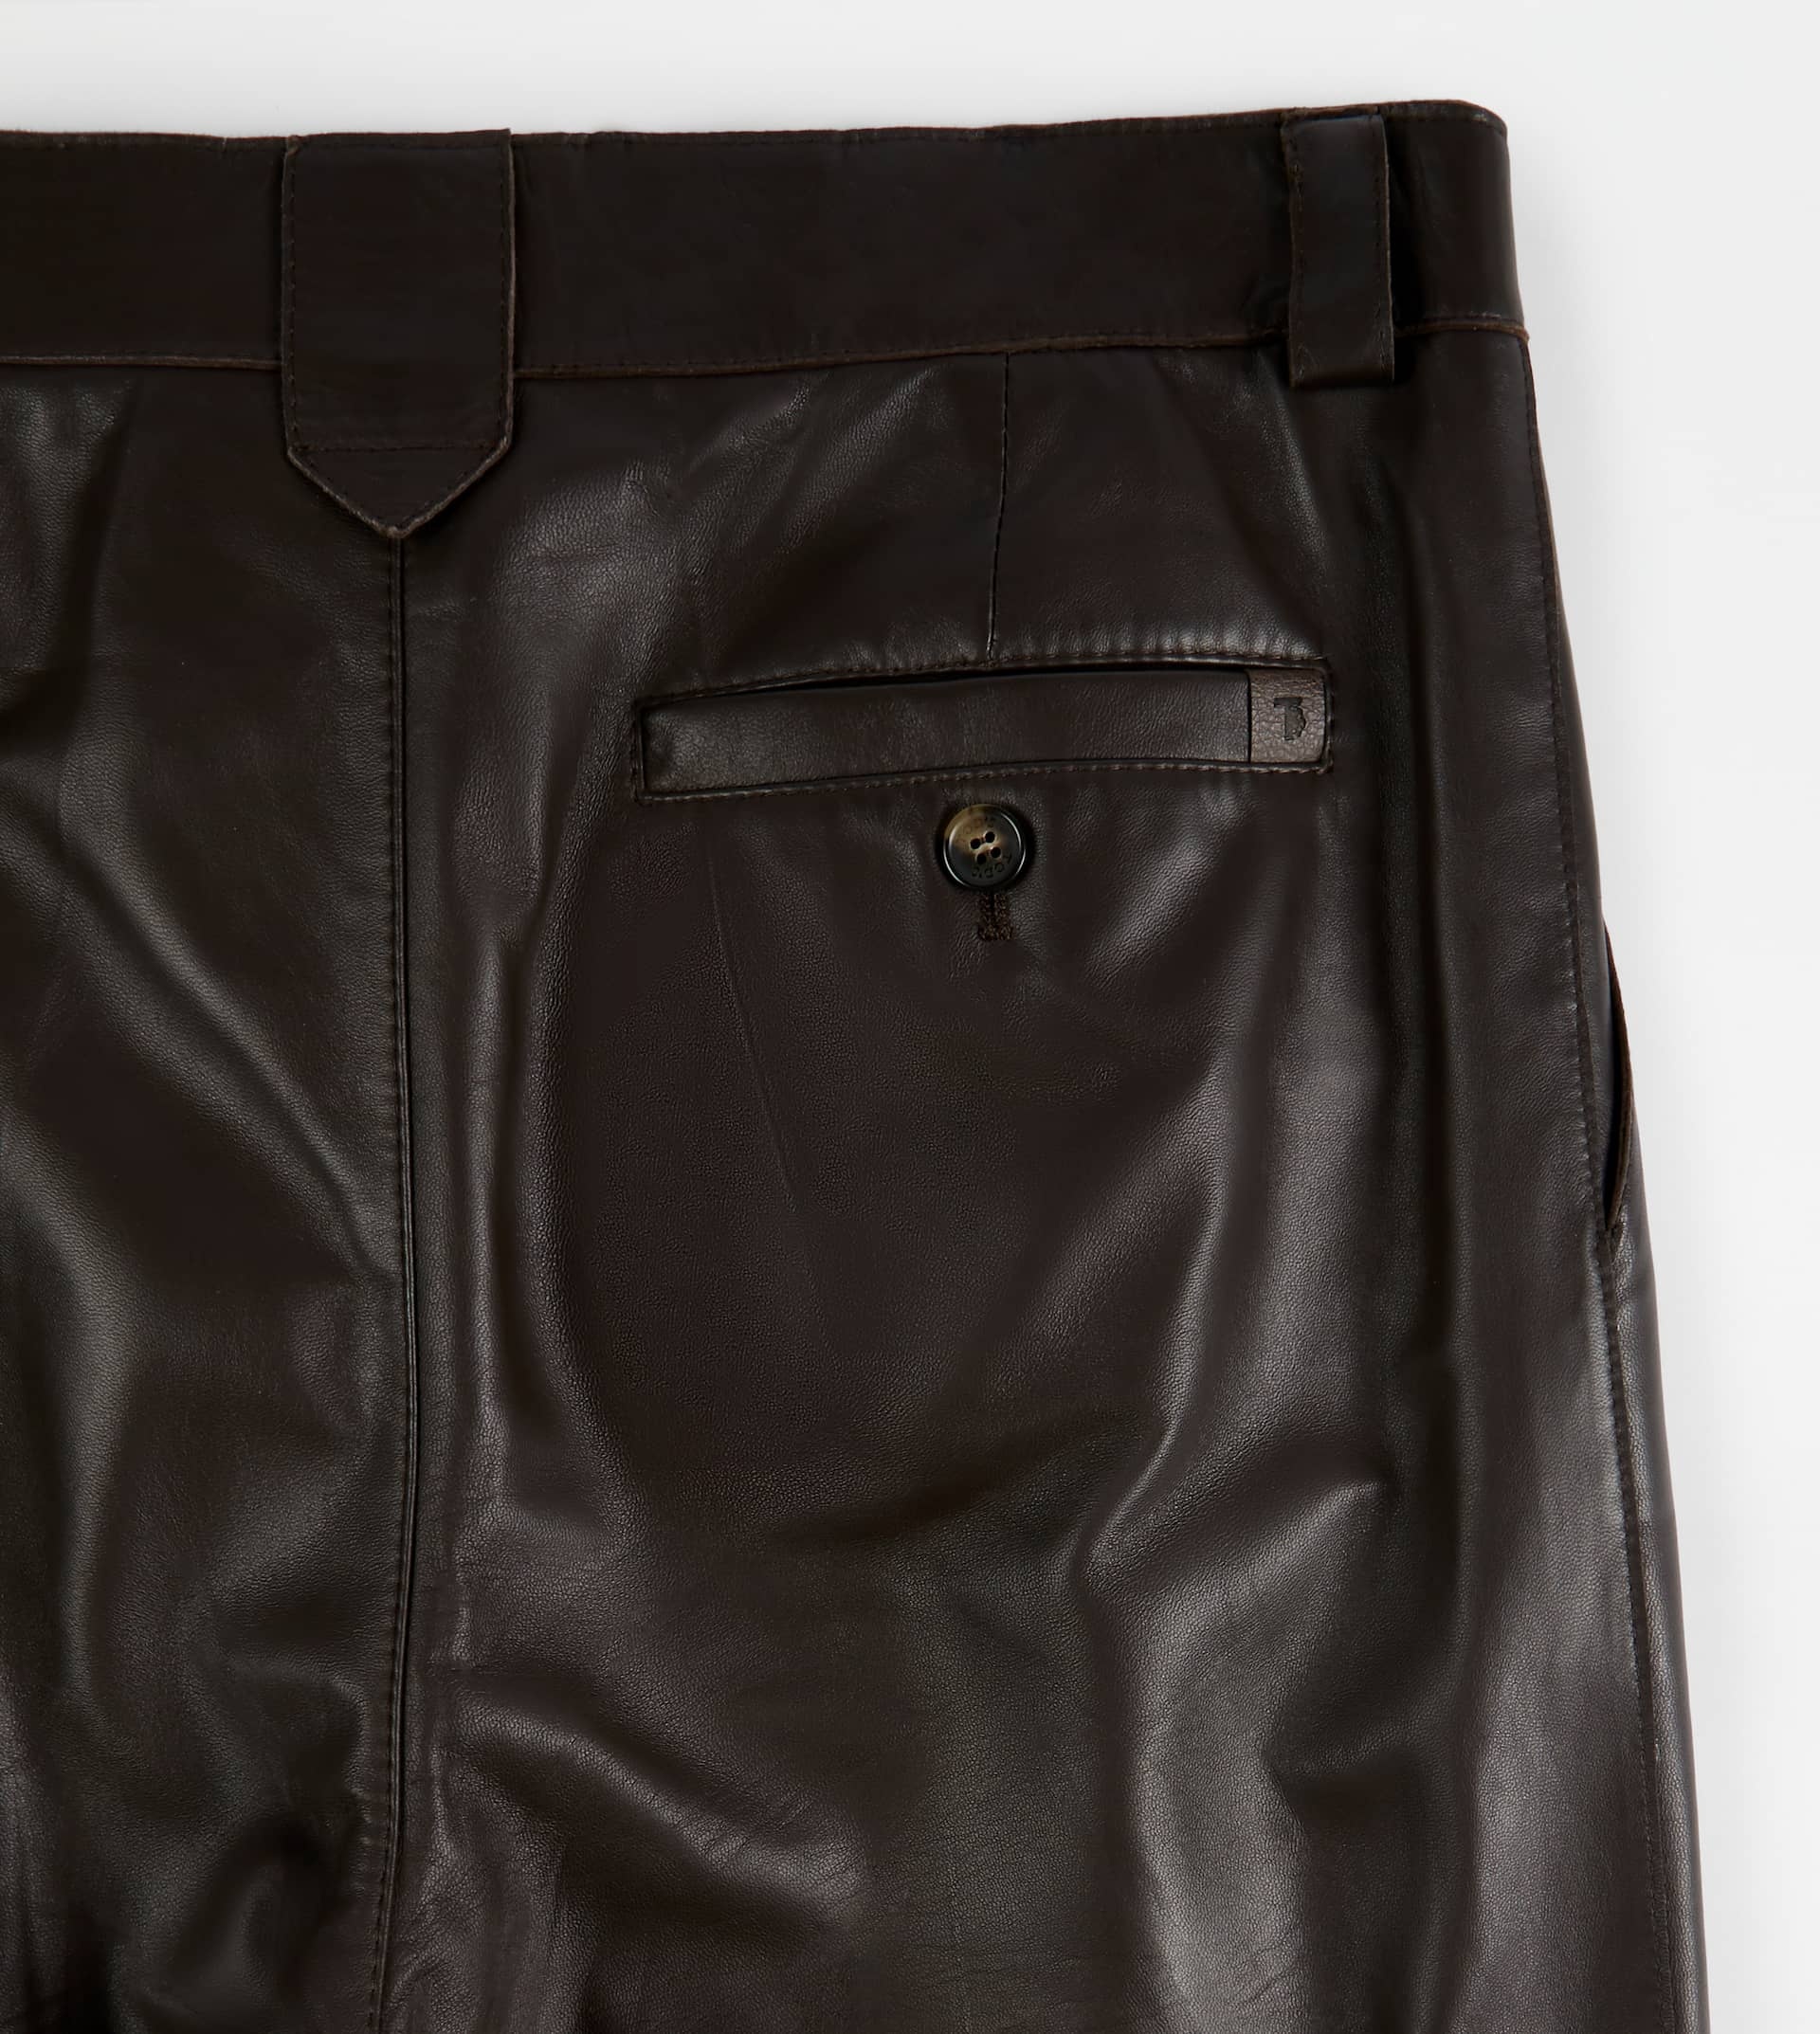 PANTS IN NAPPA LEATHER - BROWN - 9